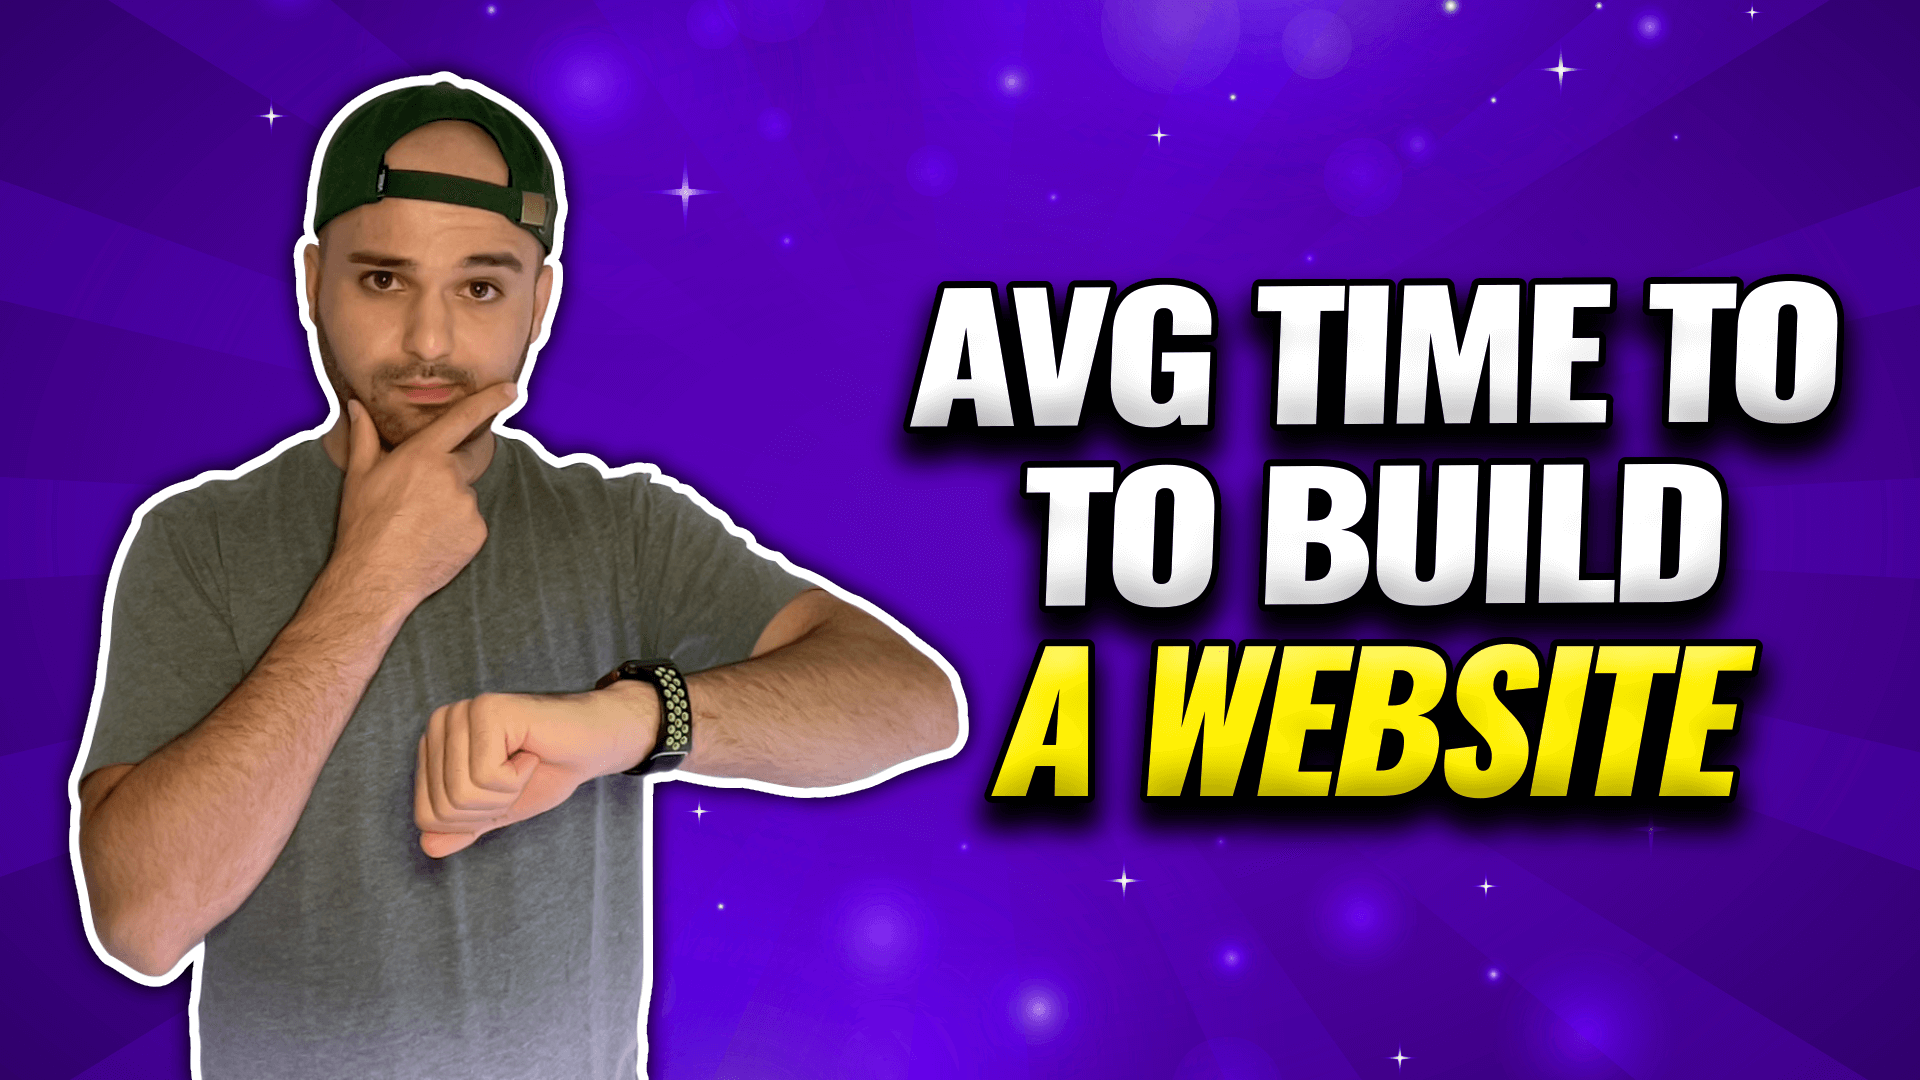 “Average time to build a website”. With me pointing to my watch